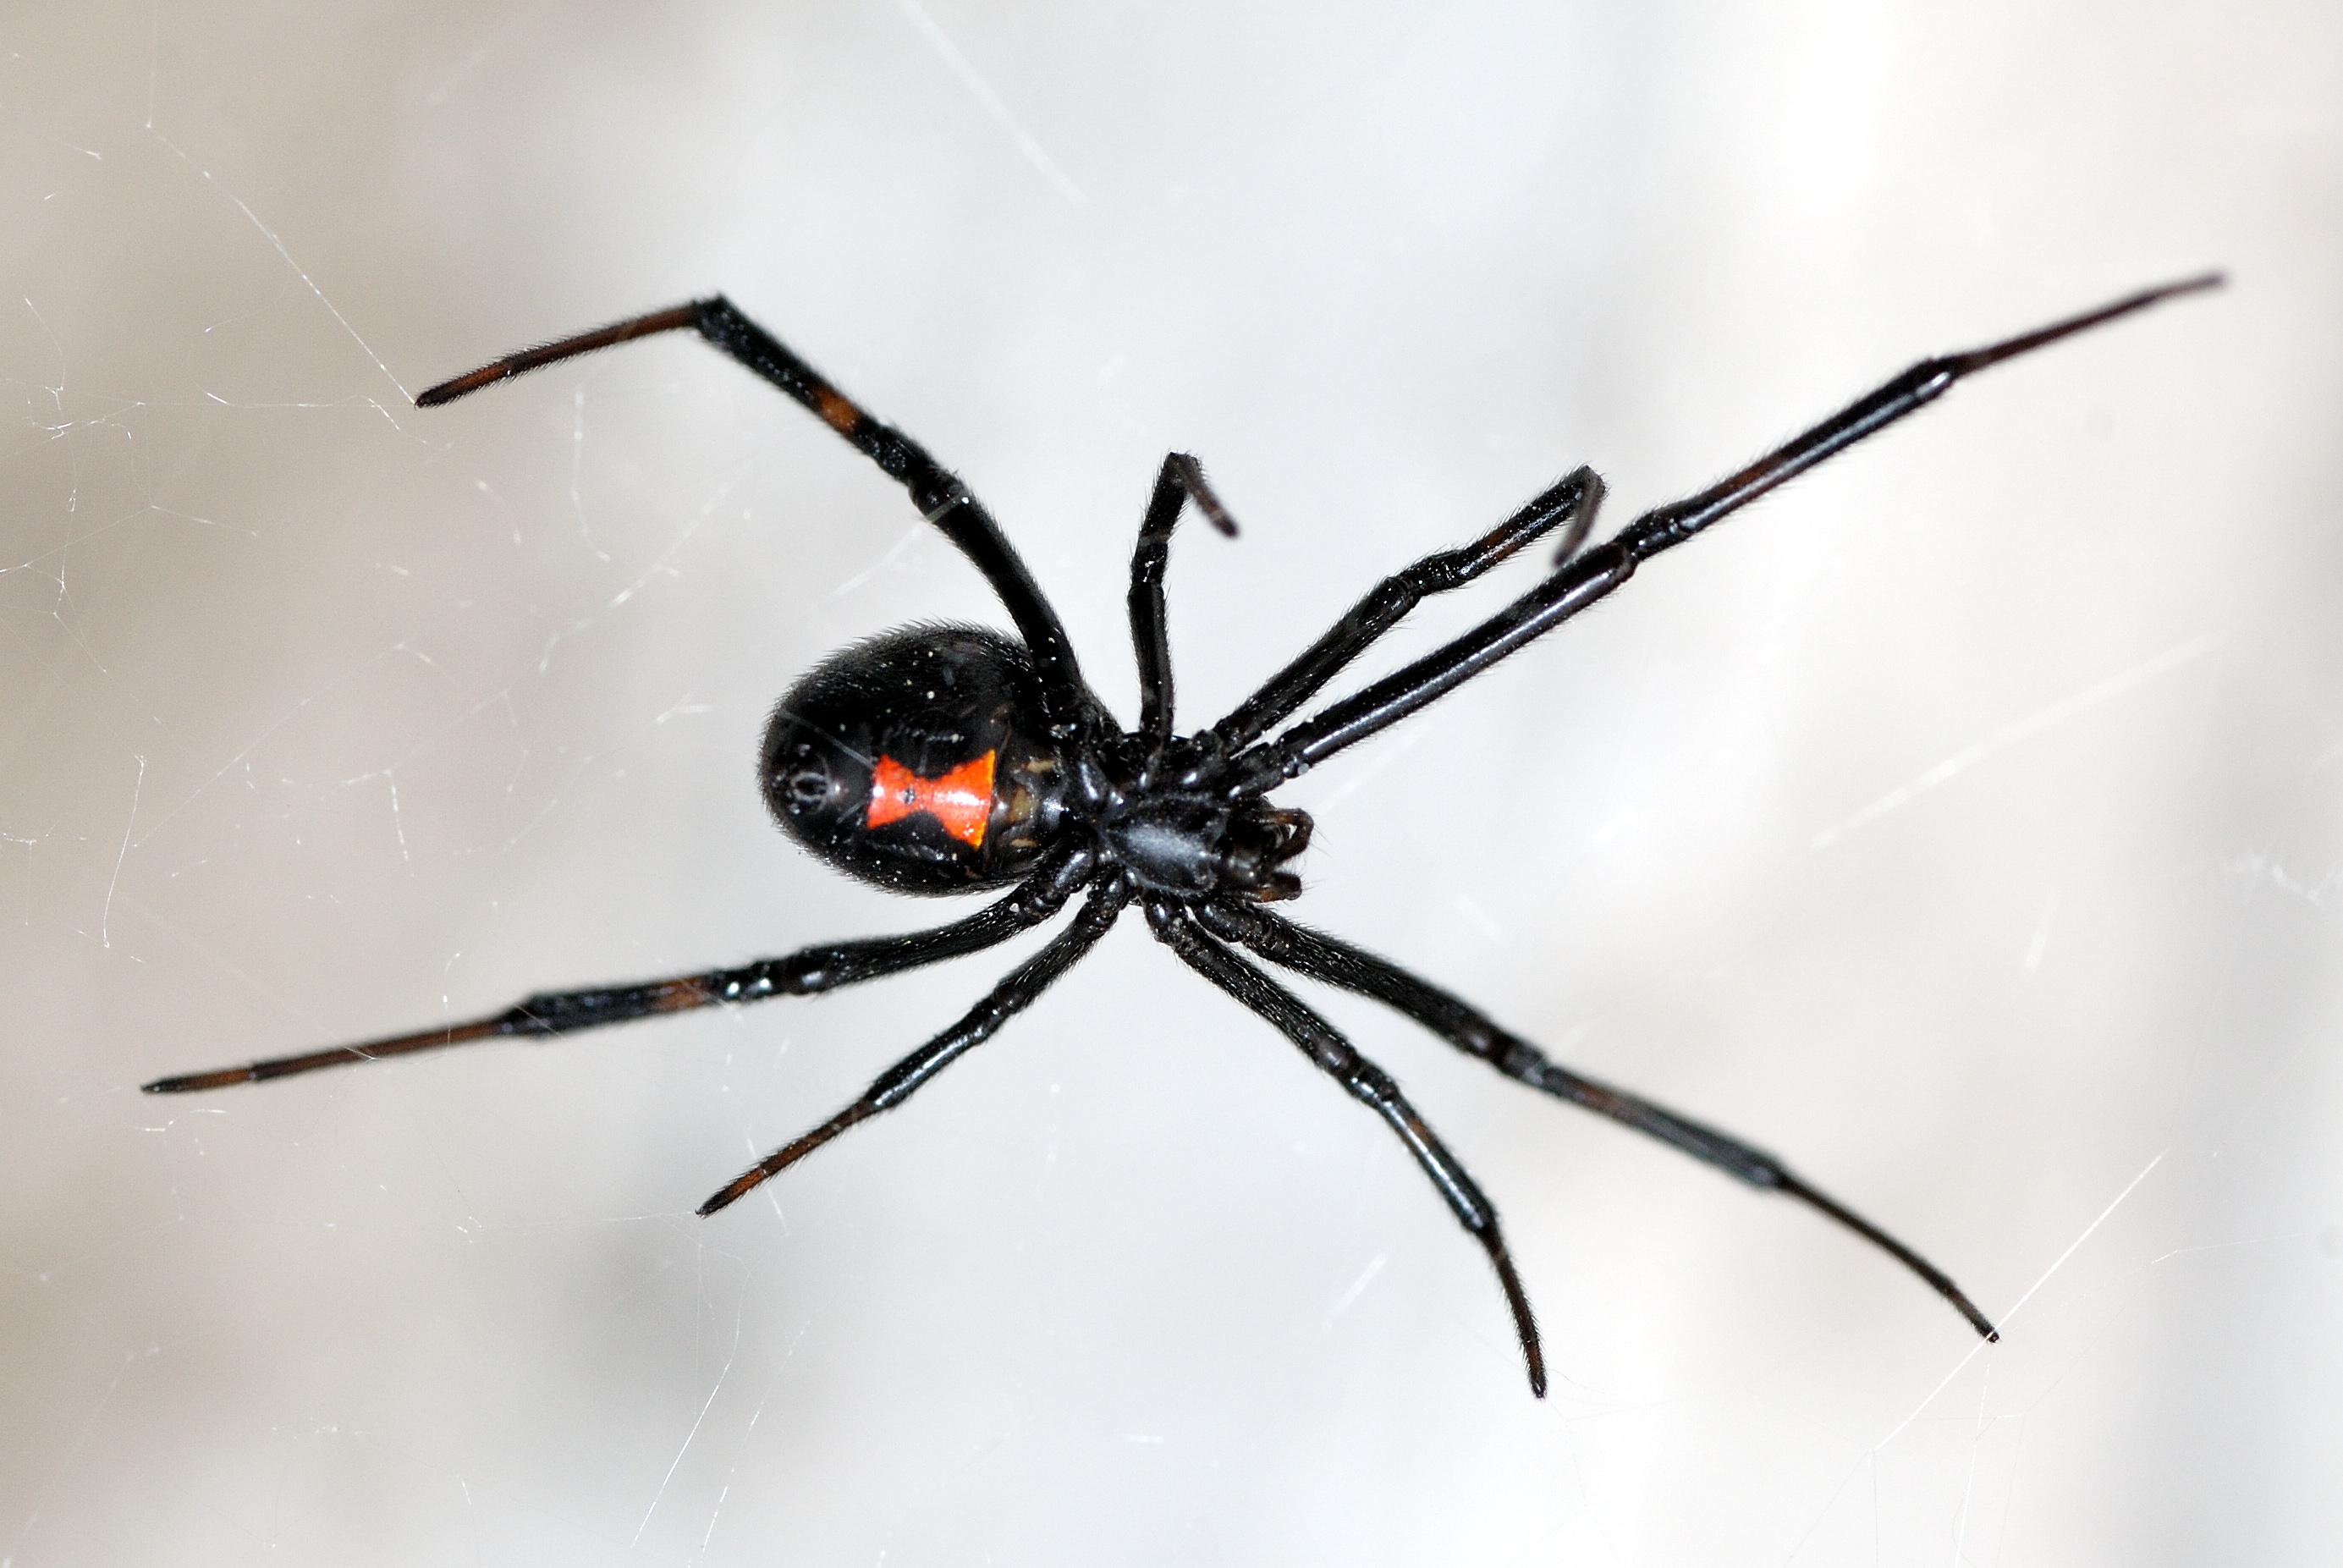 How to get Rid of Black Widow Spiders - Insectek Pest Solutions